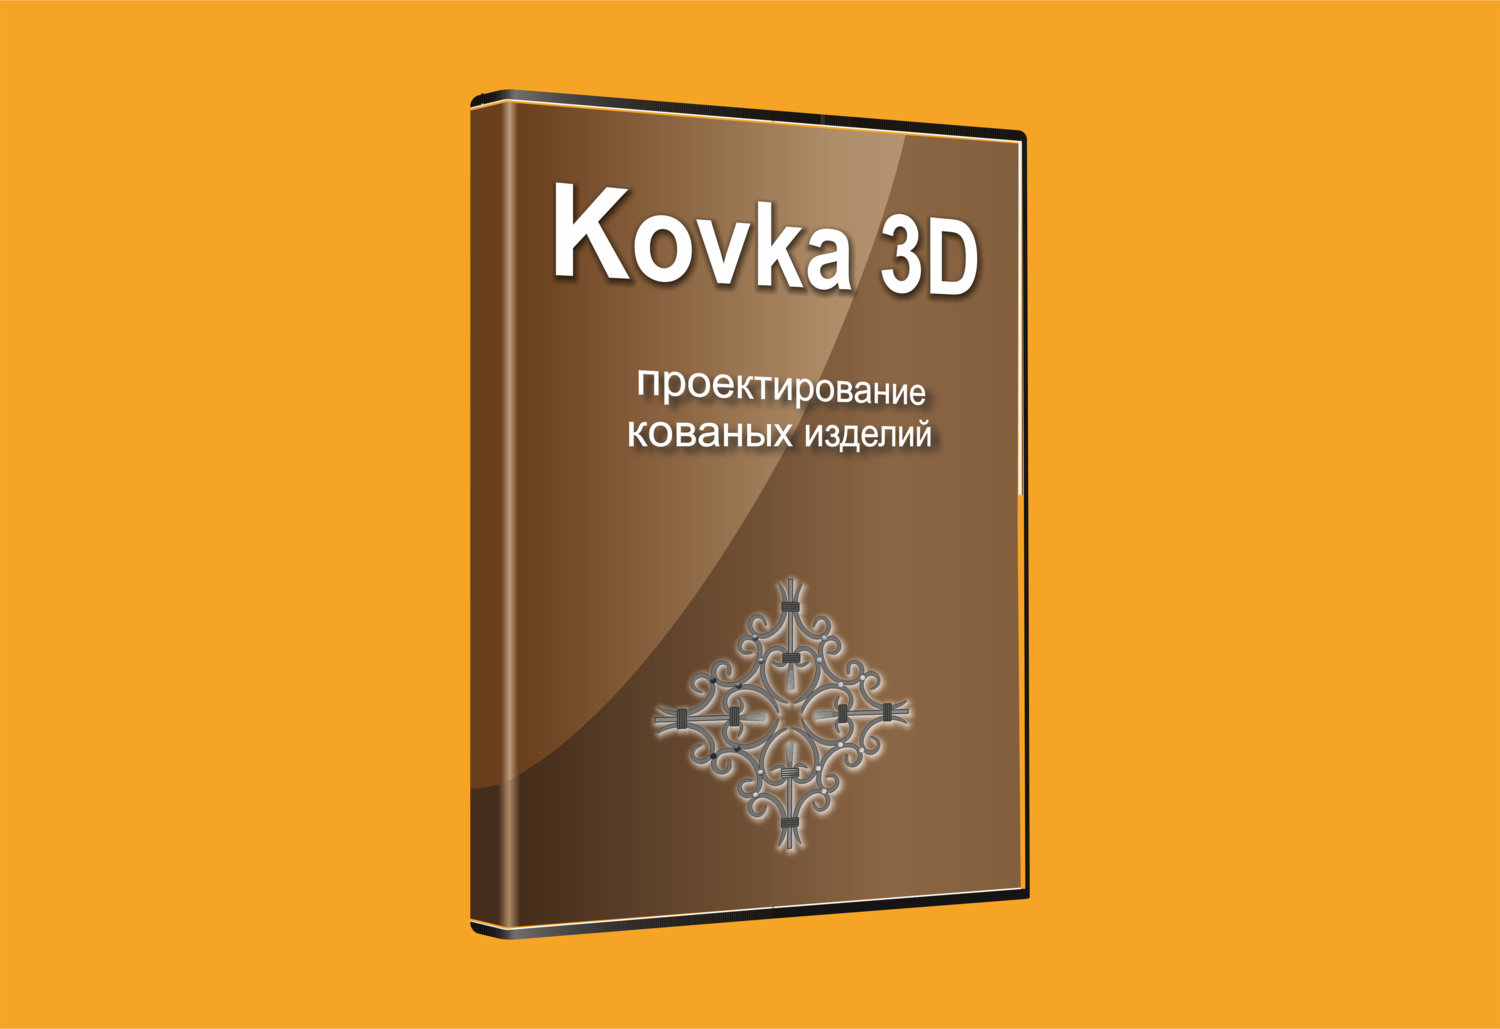 <span style="font-weight: bold;">Кovka 3D</span>